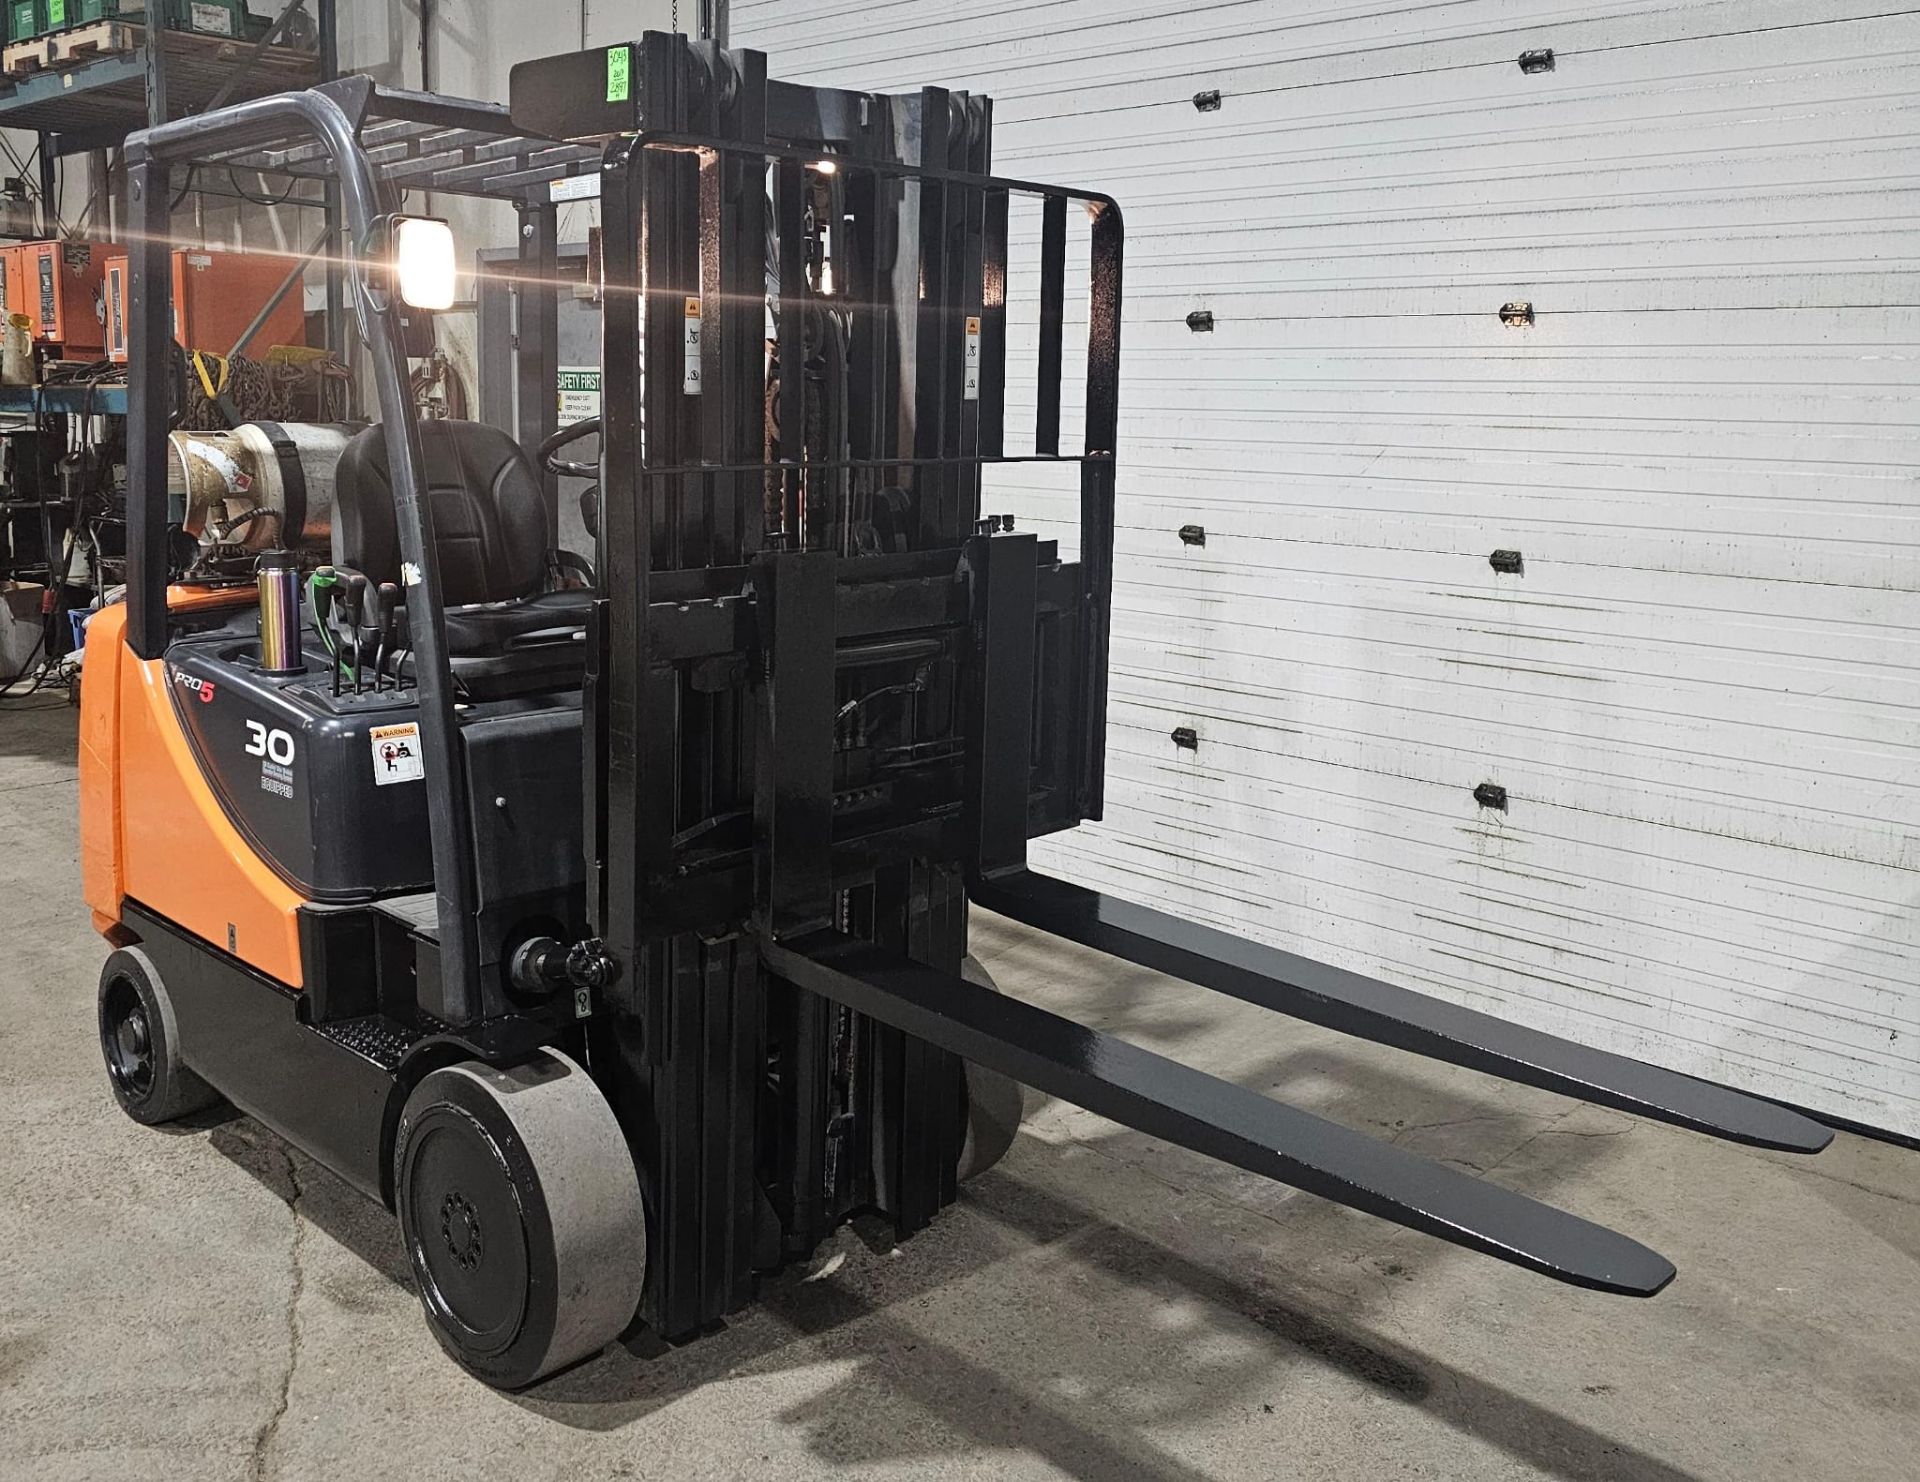 2017 DOOSAN 6,000lbs Capacity LPG (Propane) Forklift with sideshift & 3-STAGE MAST 189" load - Image 6 of 9